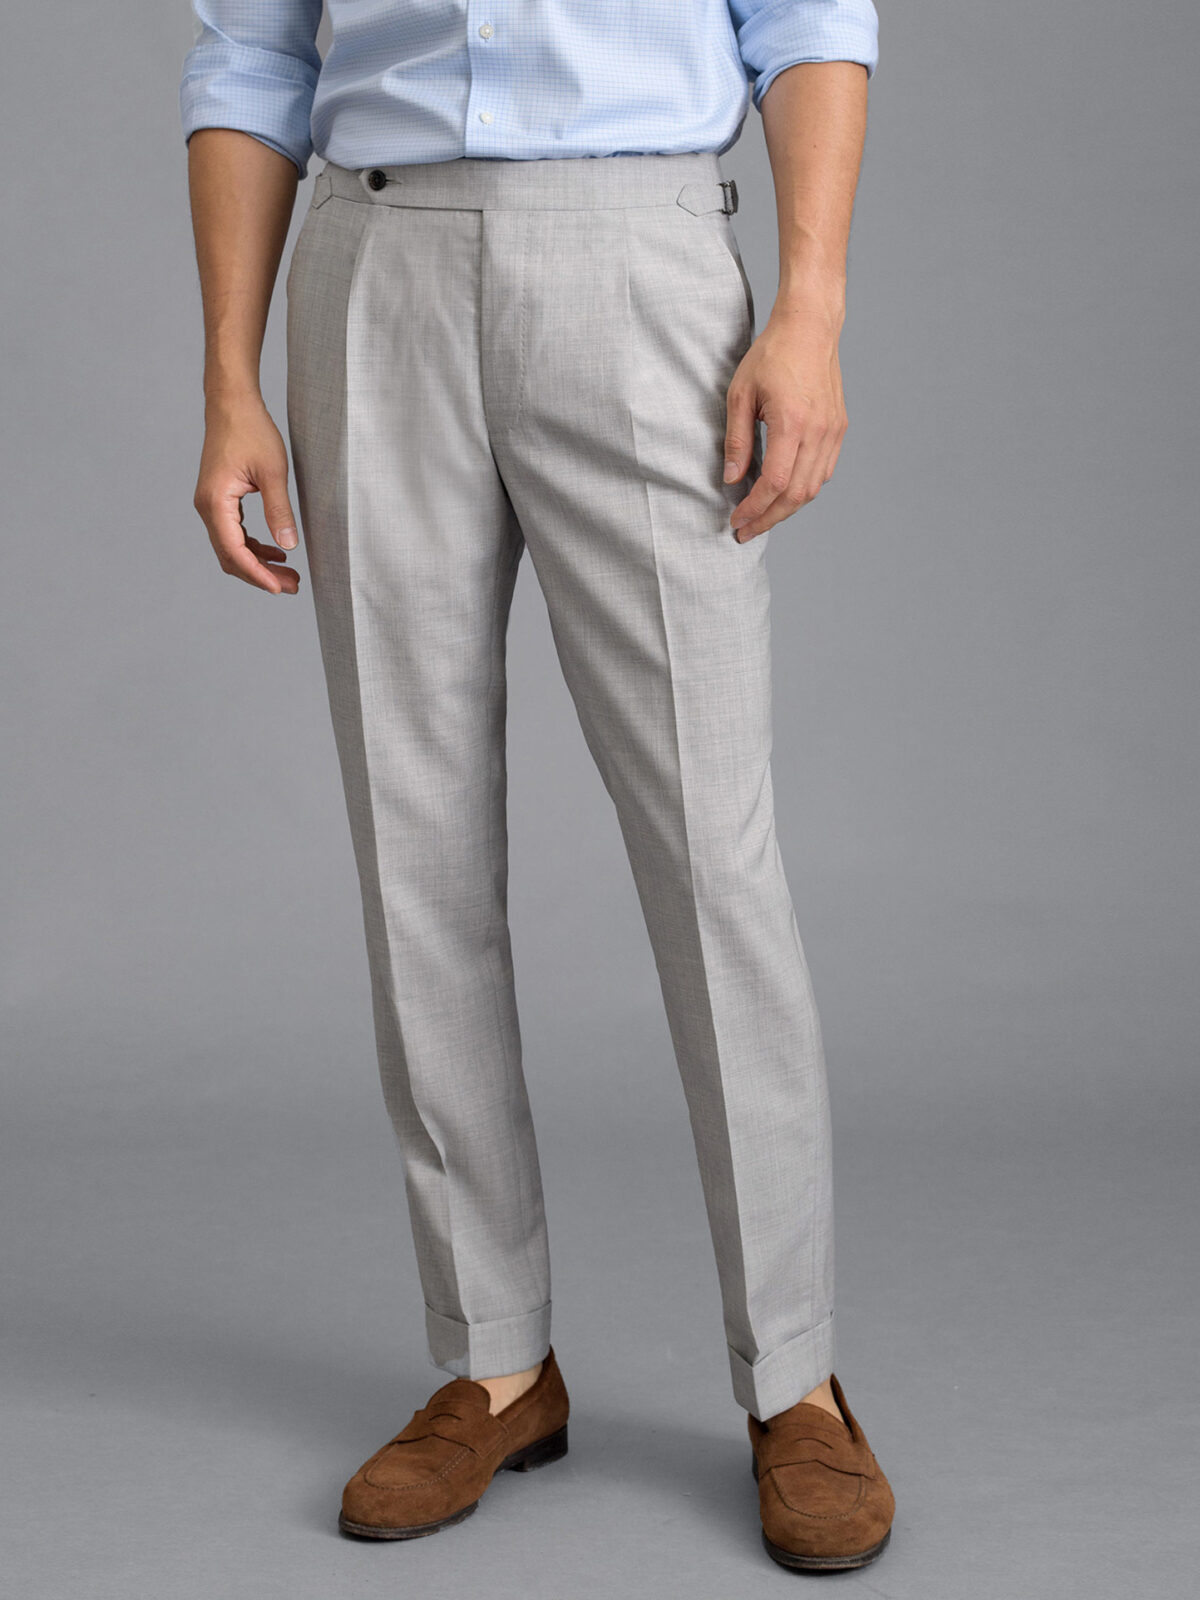 Drago Light Grey S130s Tropical Wool Dress Pant - Custom Fit Tailored  Clothing